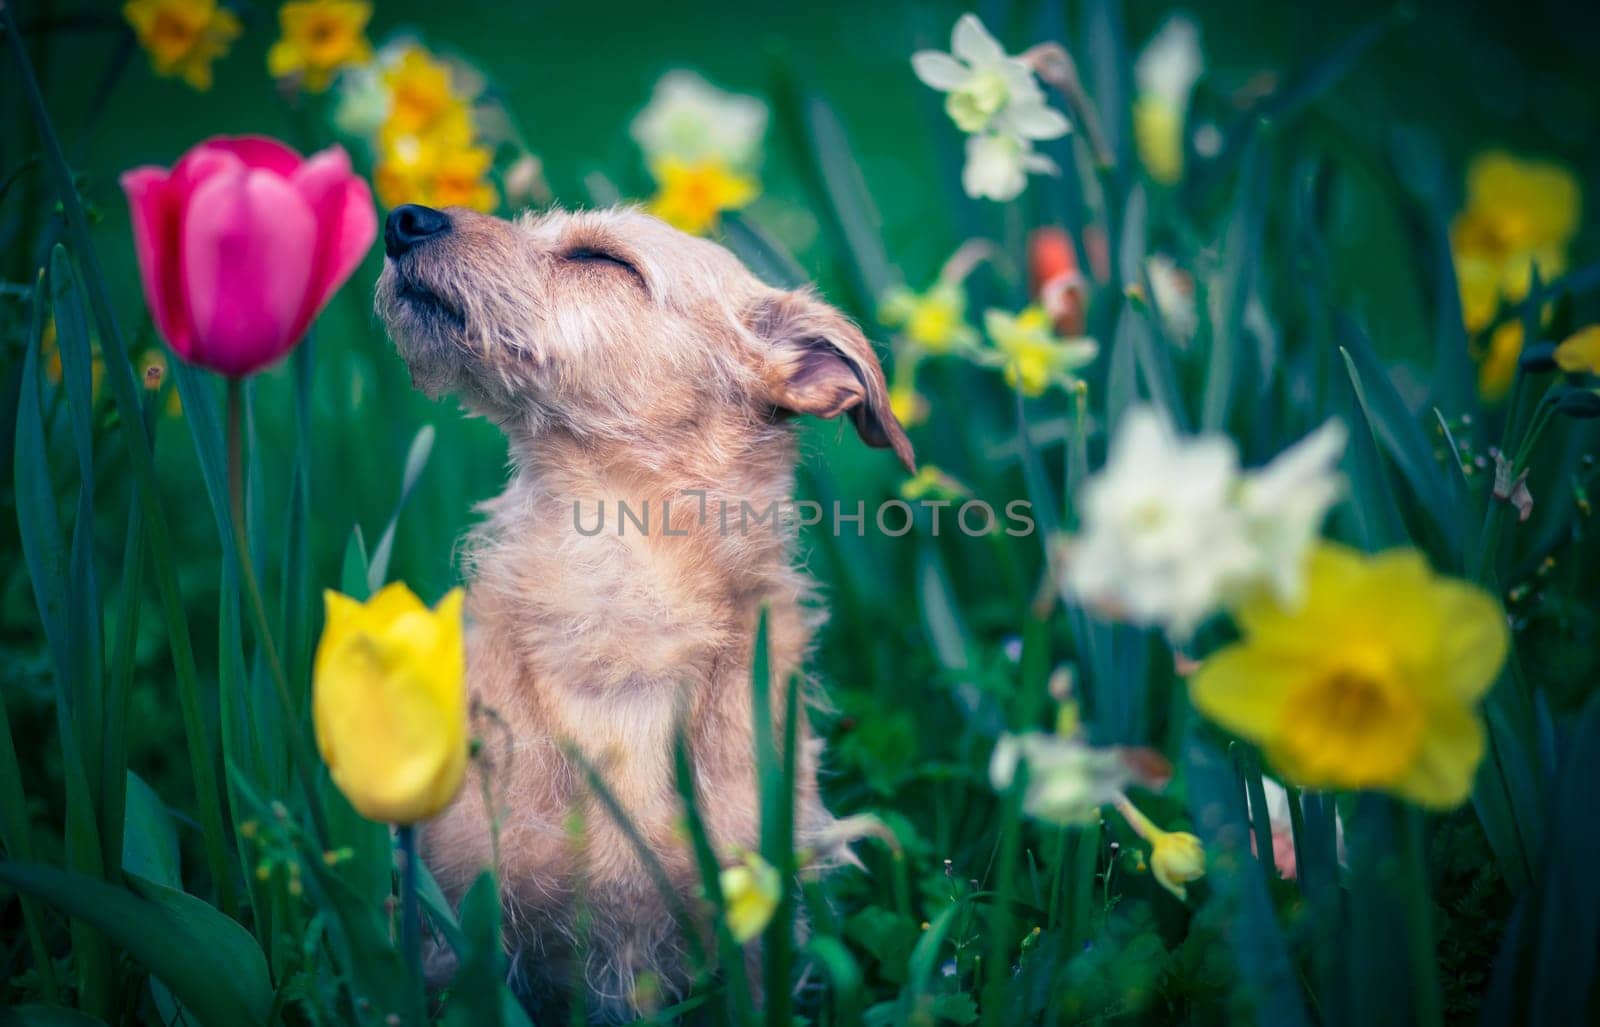 The scent of flowers for a dog by Tilo